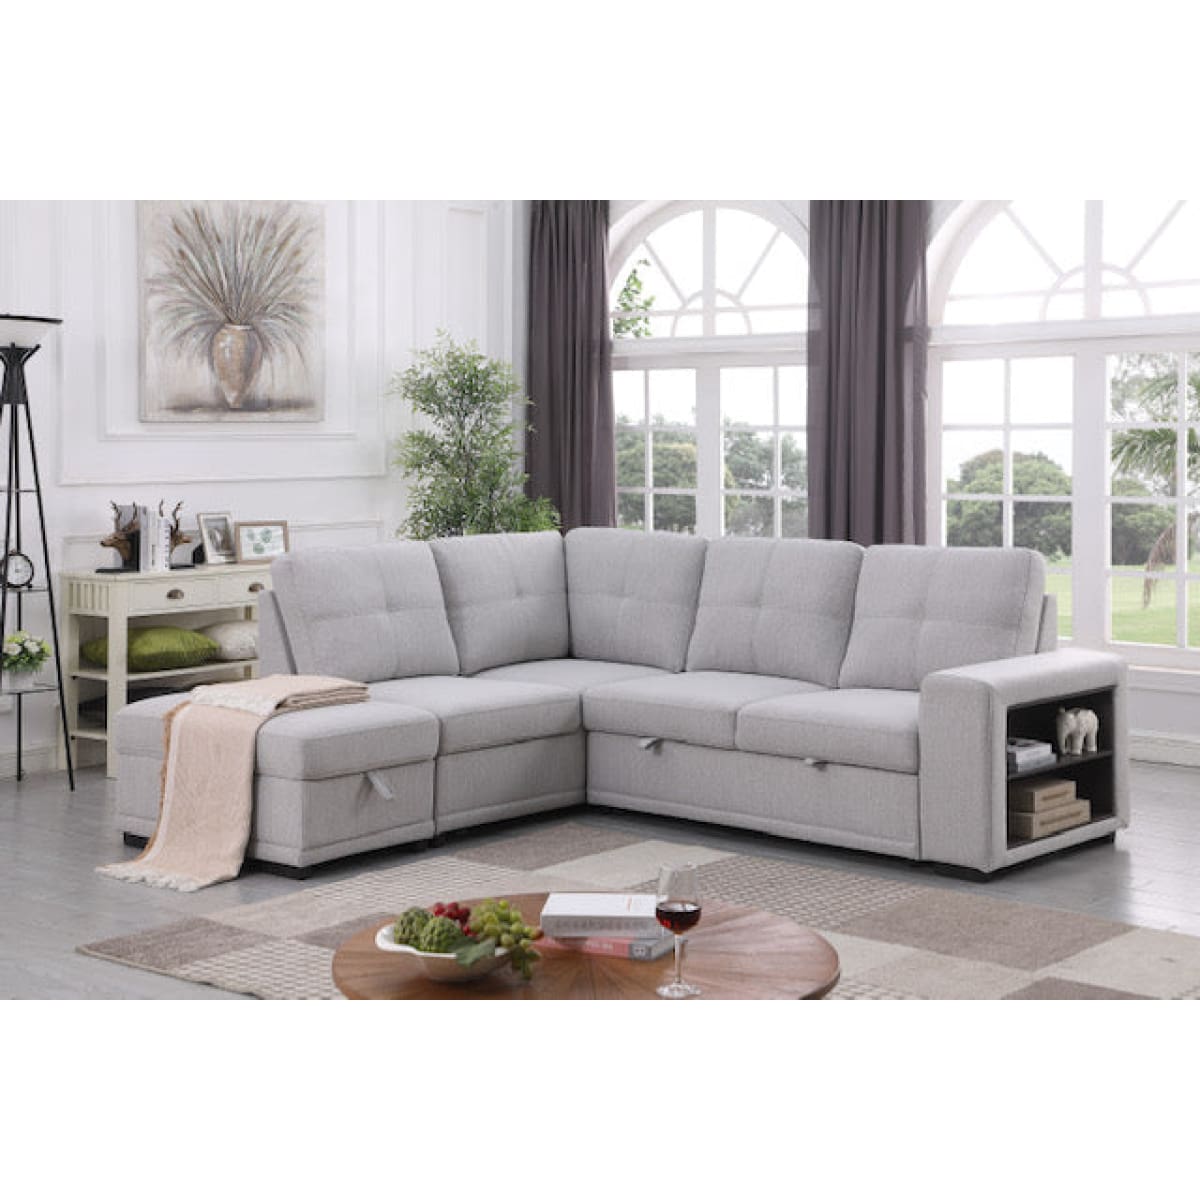 Riley Sleeper Sectional w/Storage - Sofabed